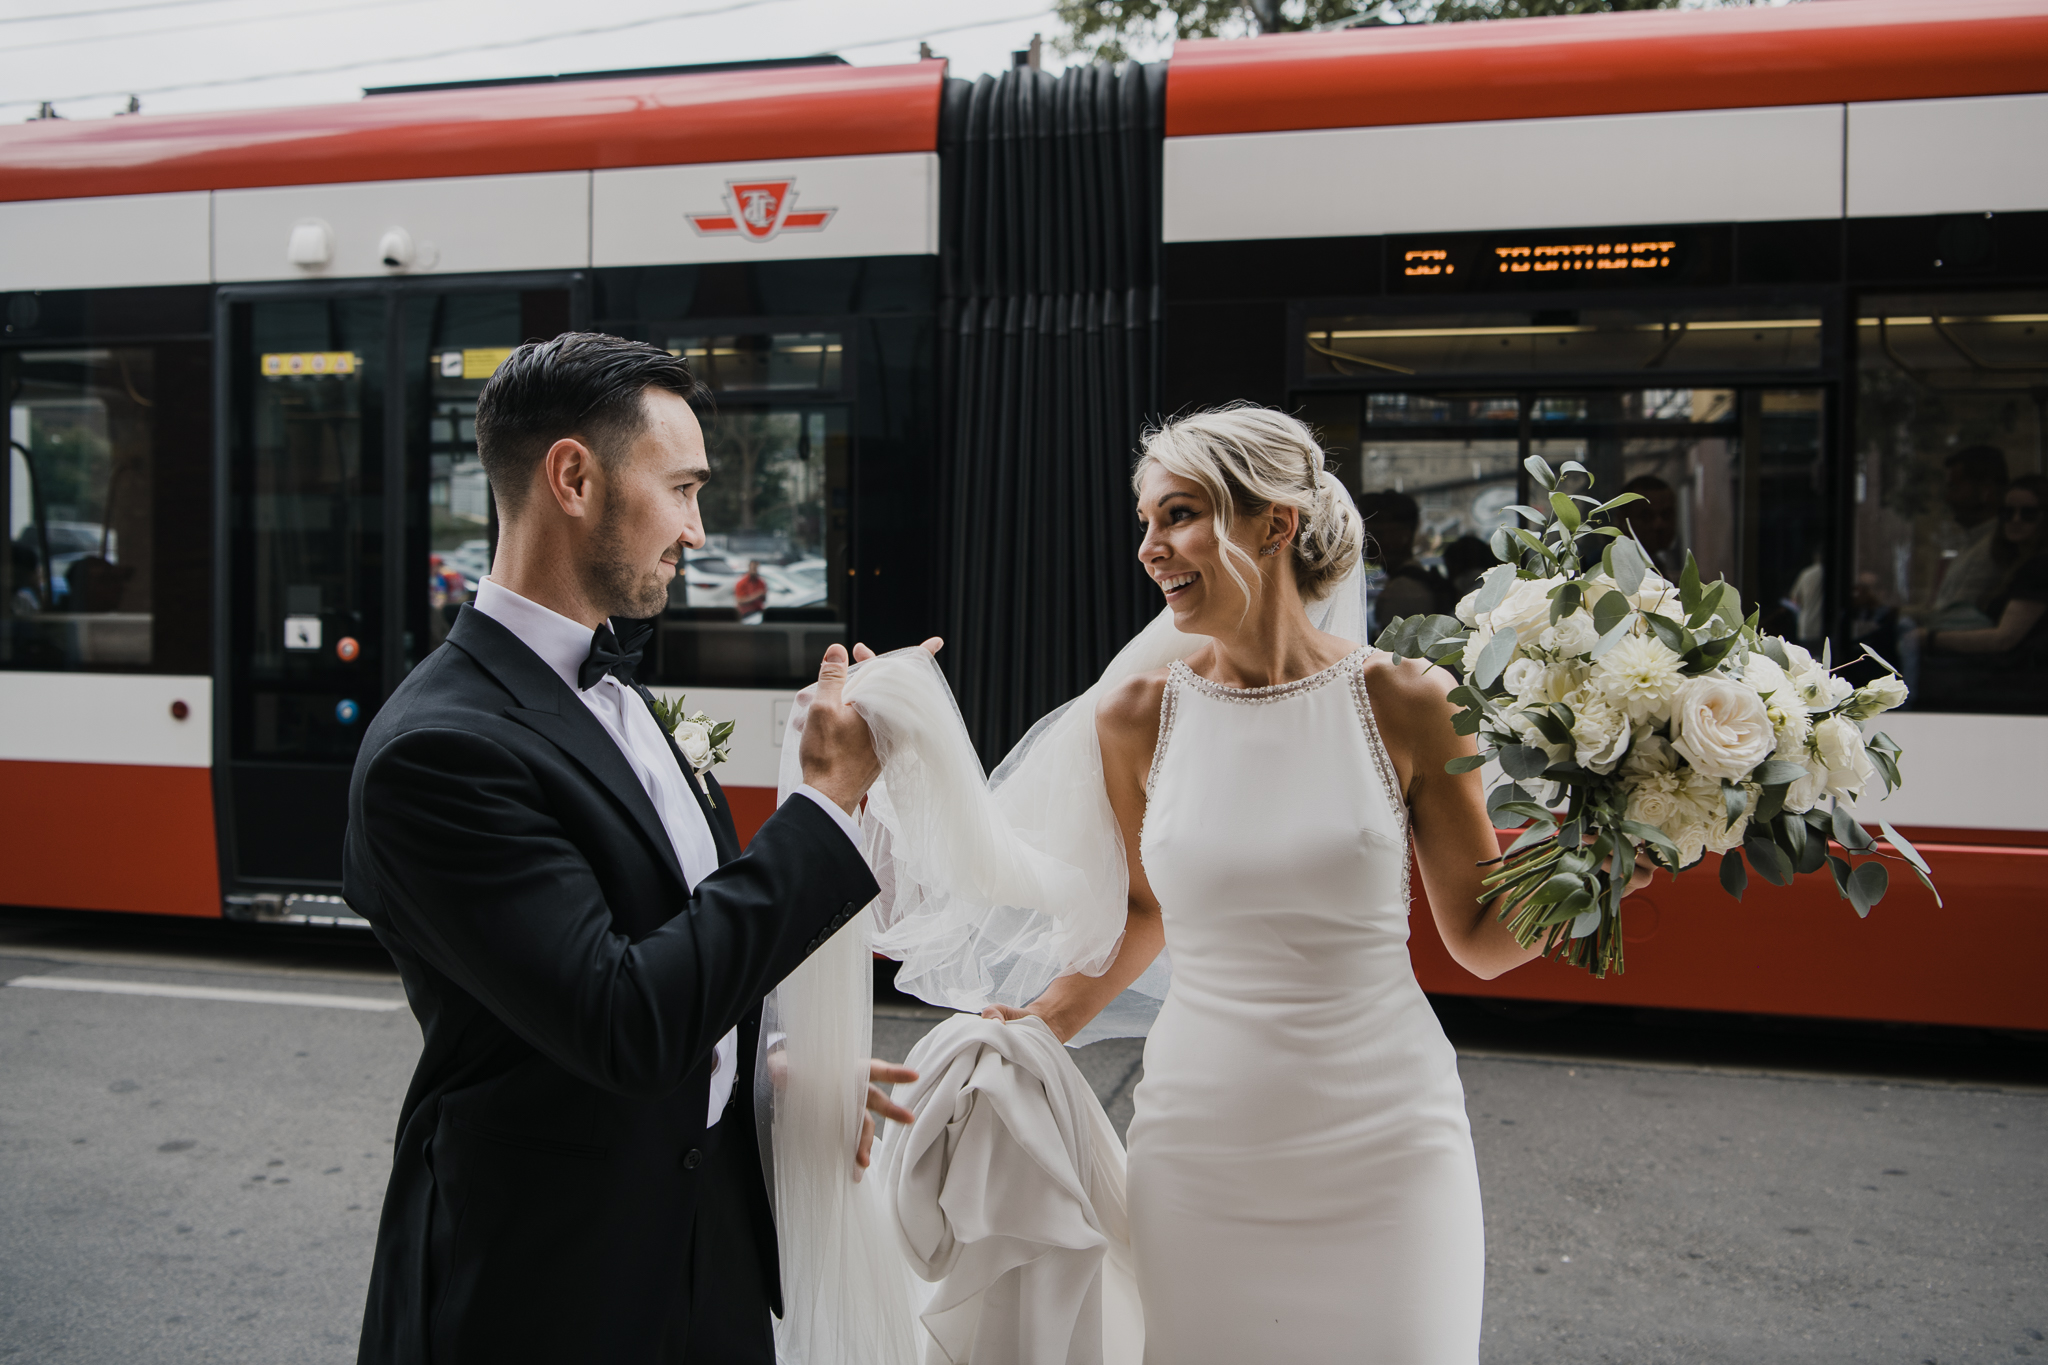 Bride and Groom in front of Toronto Streetcar outside Broadview Hotel Wedding